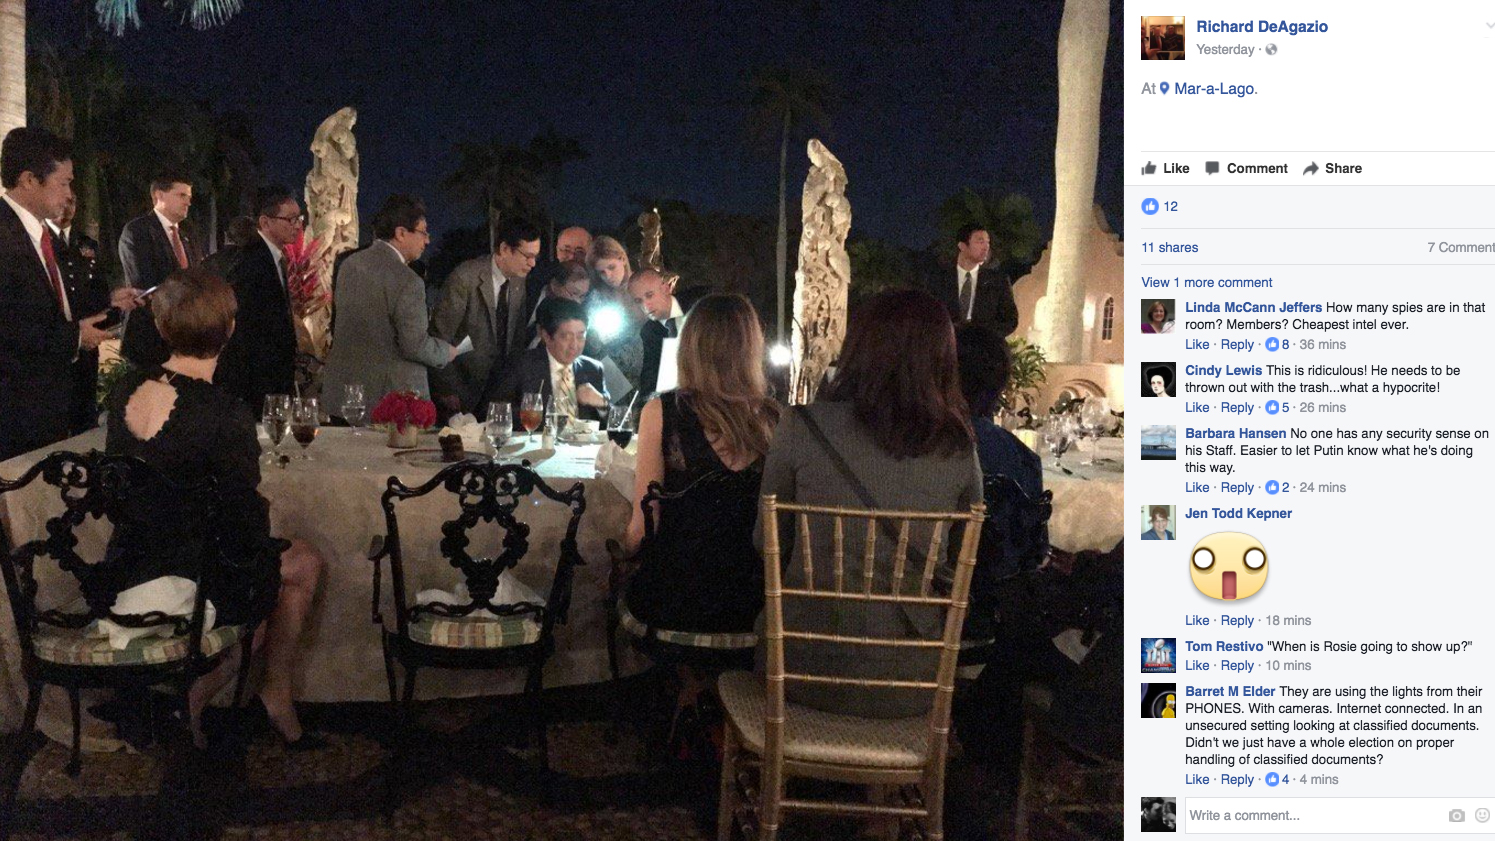 A screengrab of a photo posted on the Facebook page of Richard DeAgazio was said to show Japanese Prime Minister Shinzo Abe huddling with staffers during dinner at President Trump's Mar-a-Lago residence after news spread about North Korea's missile launch. (Courtesy of Richard DeAgazio/Facebook)